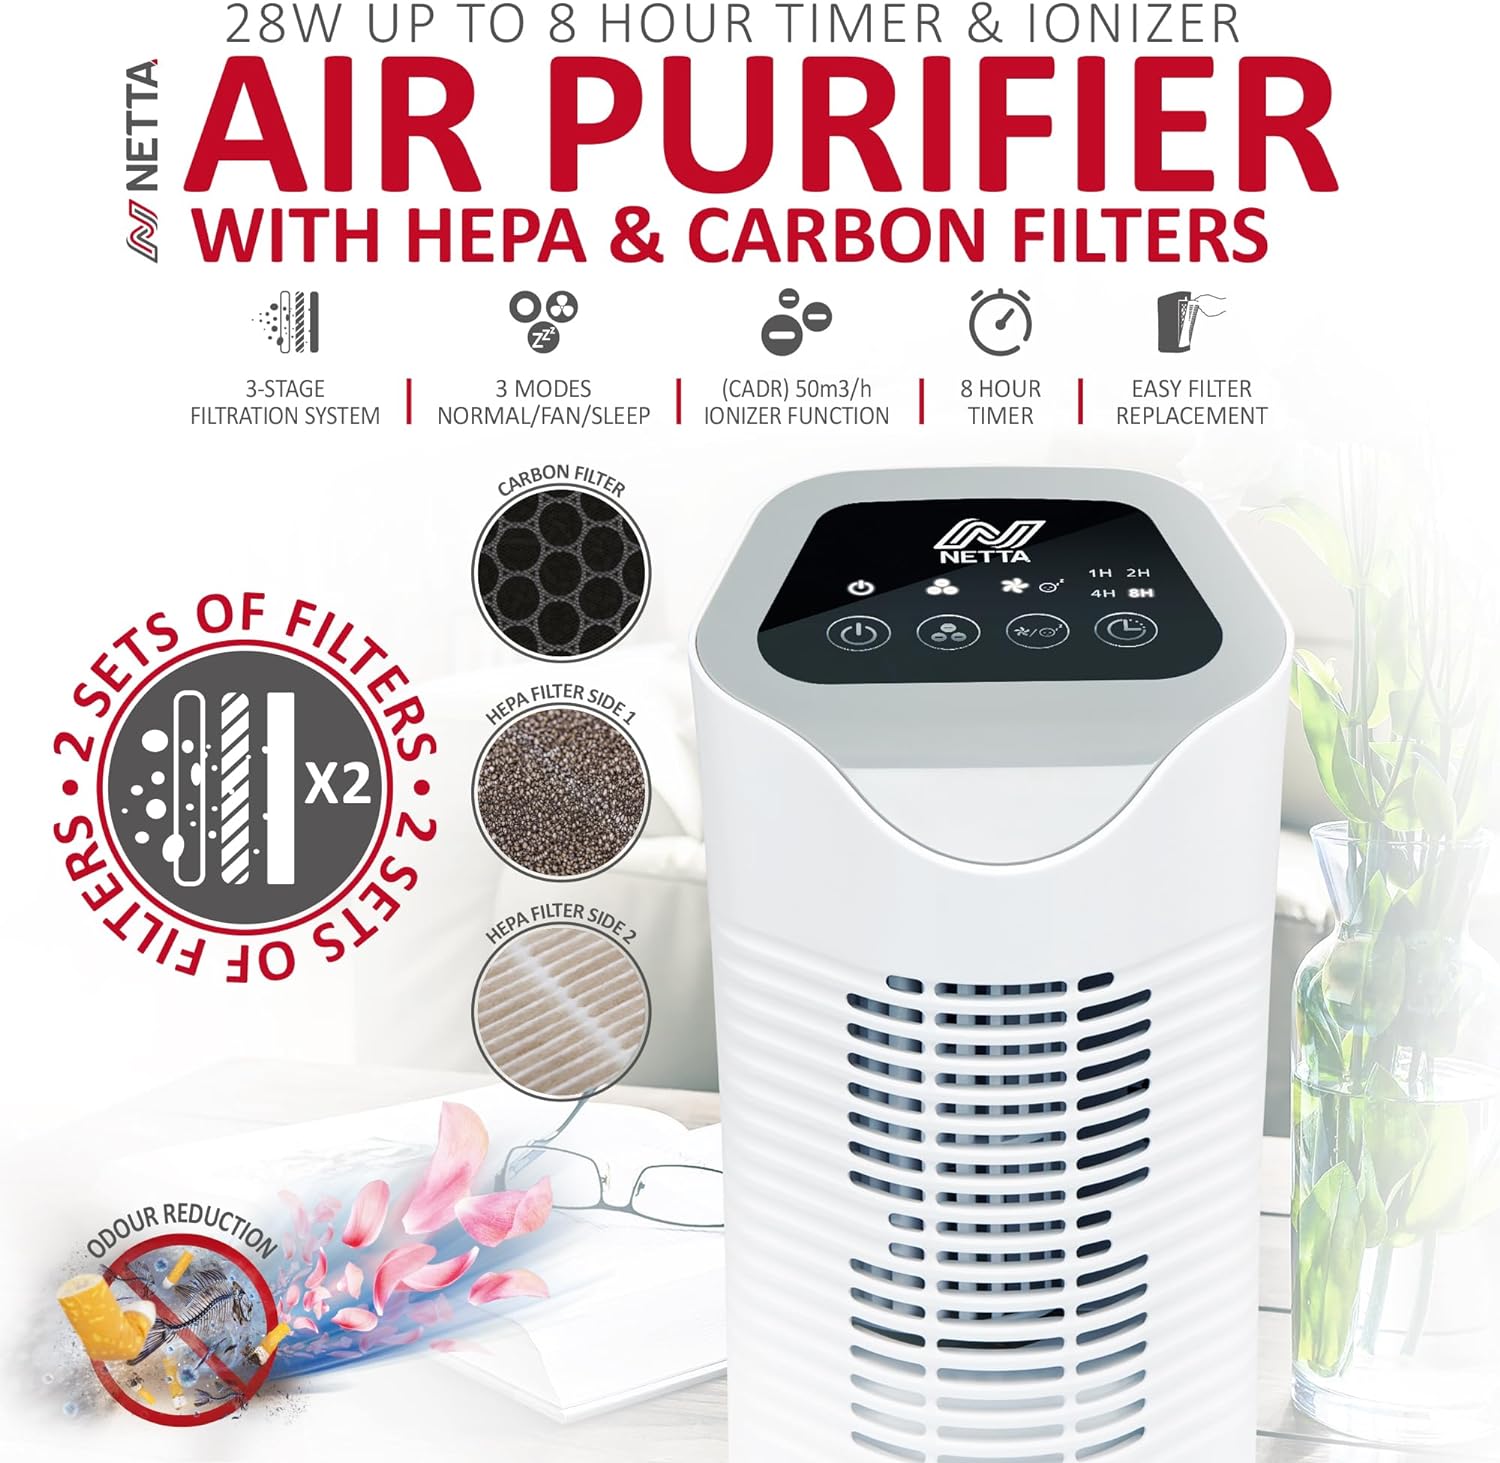 NETTA Air Purifier with Extra Spare filter for Allergies with True HEPA & Active Carbon Filters, 3 - Stage Filtration System, 3 Fan Speed Modes, Ionizer, 28W, CADR 50 m³/h - Sleep Mode and 8 Hour Timer - Amazing Gadgets Outlet